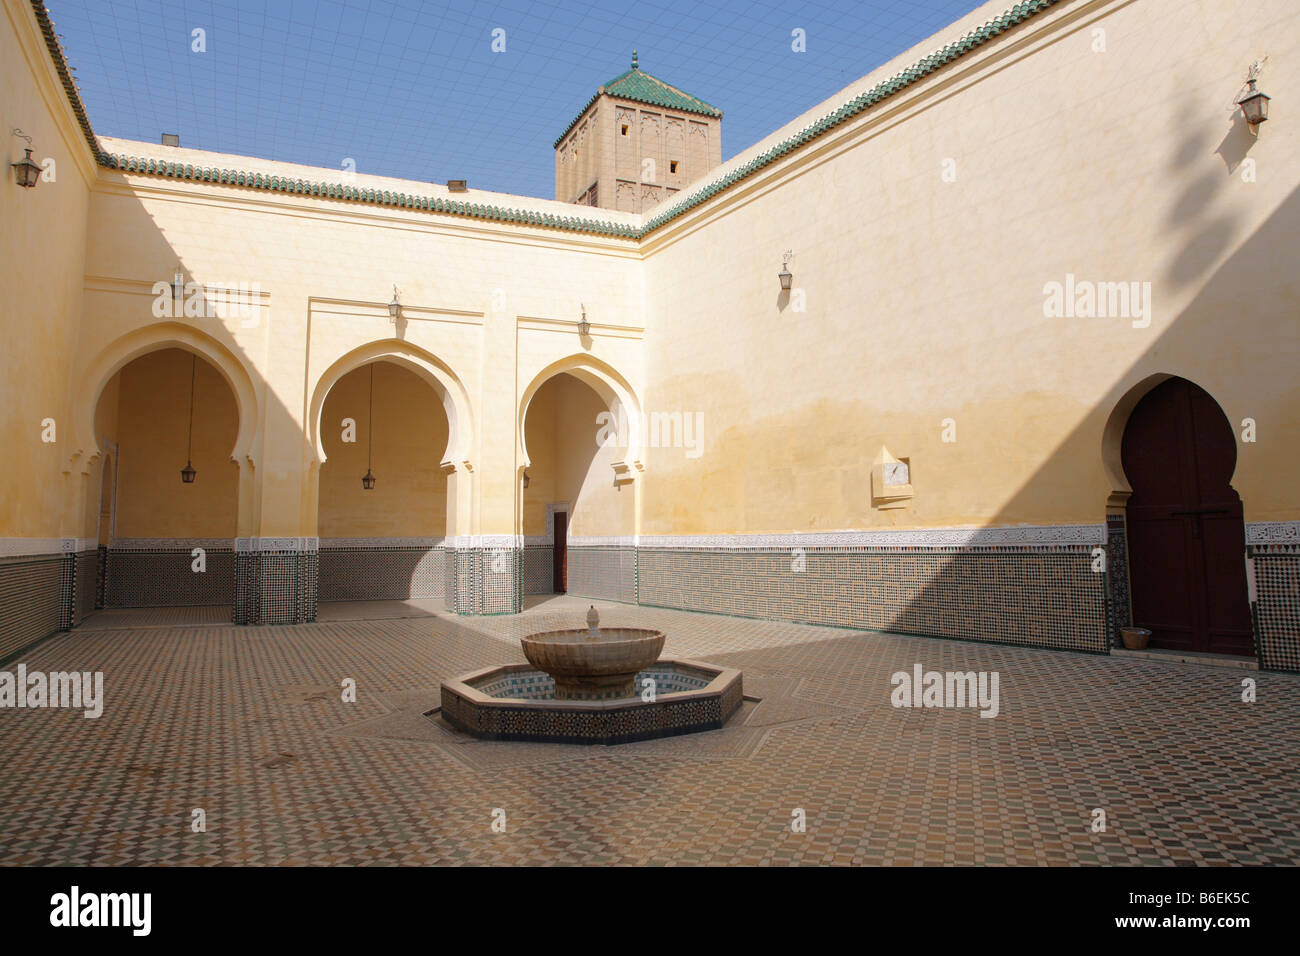 Mausoleum of Moulay Ismail, Meknes, Morocco, Africa Stock Photo